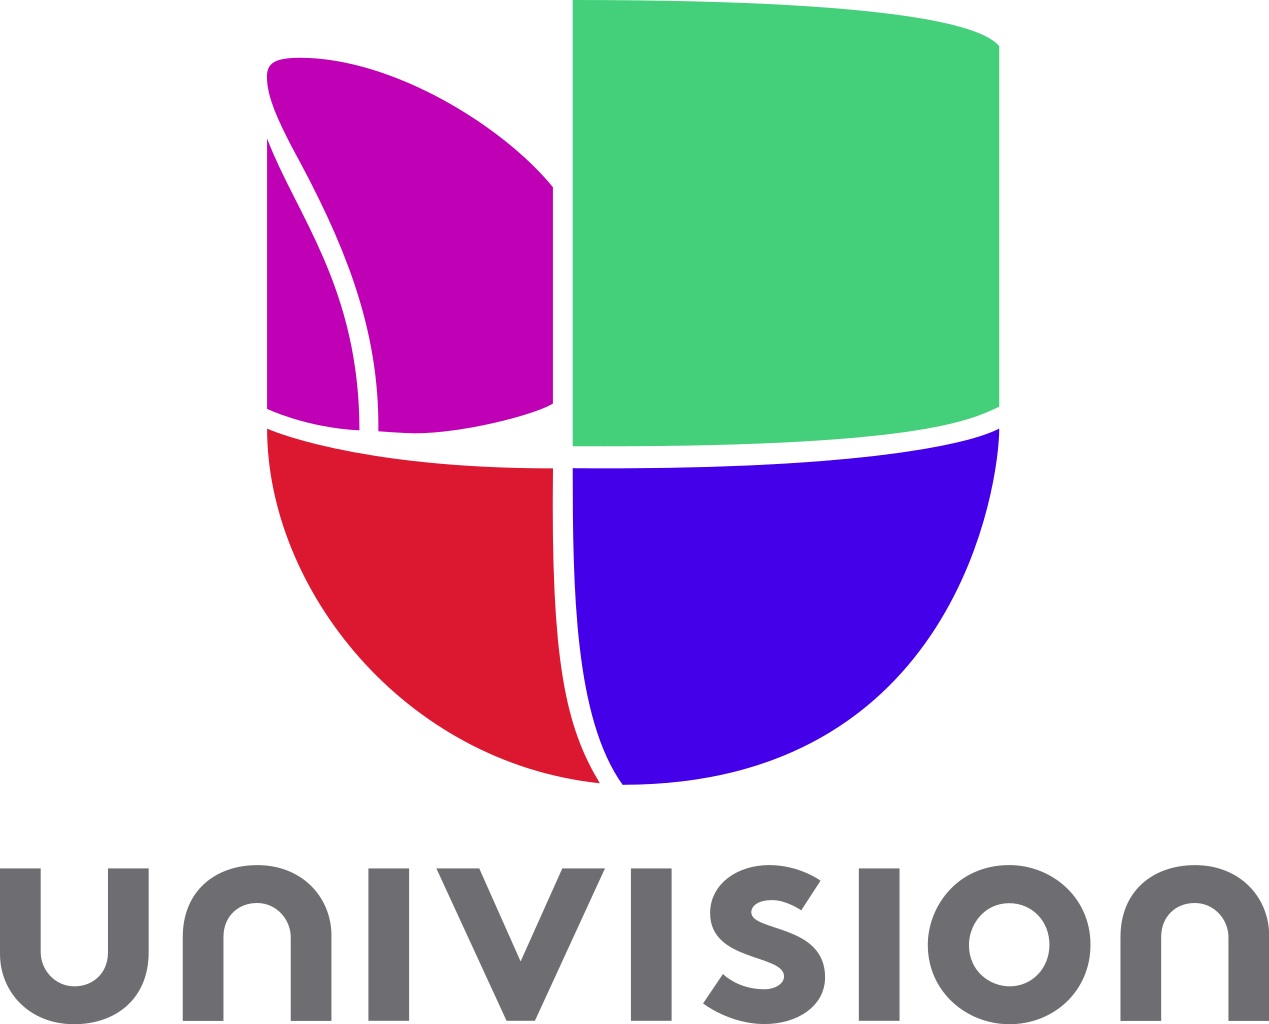 Charter’s Univision Blackout Ends With Court Ruling